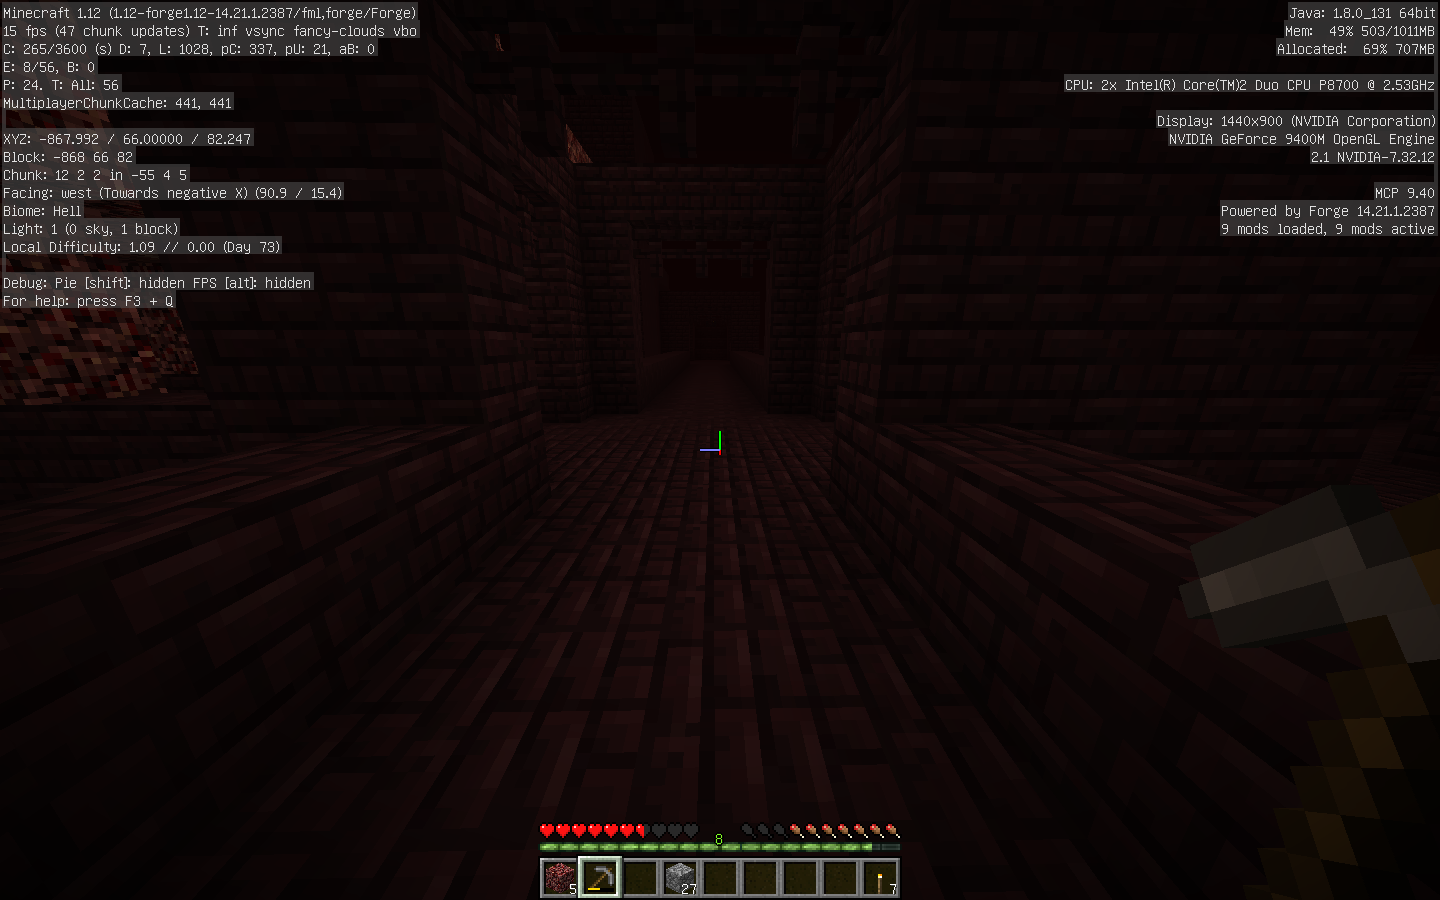 YSK: You can find way more Nether Fortresses running east or west